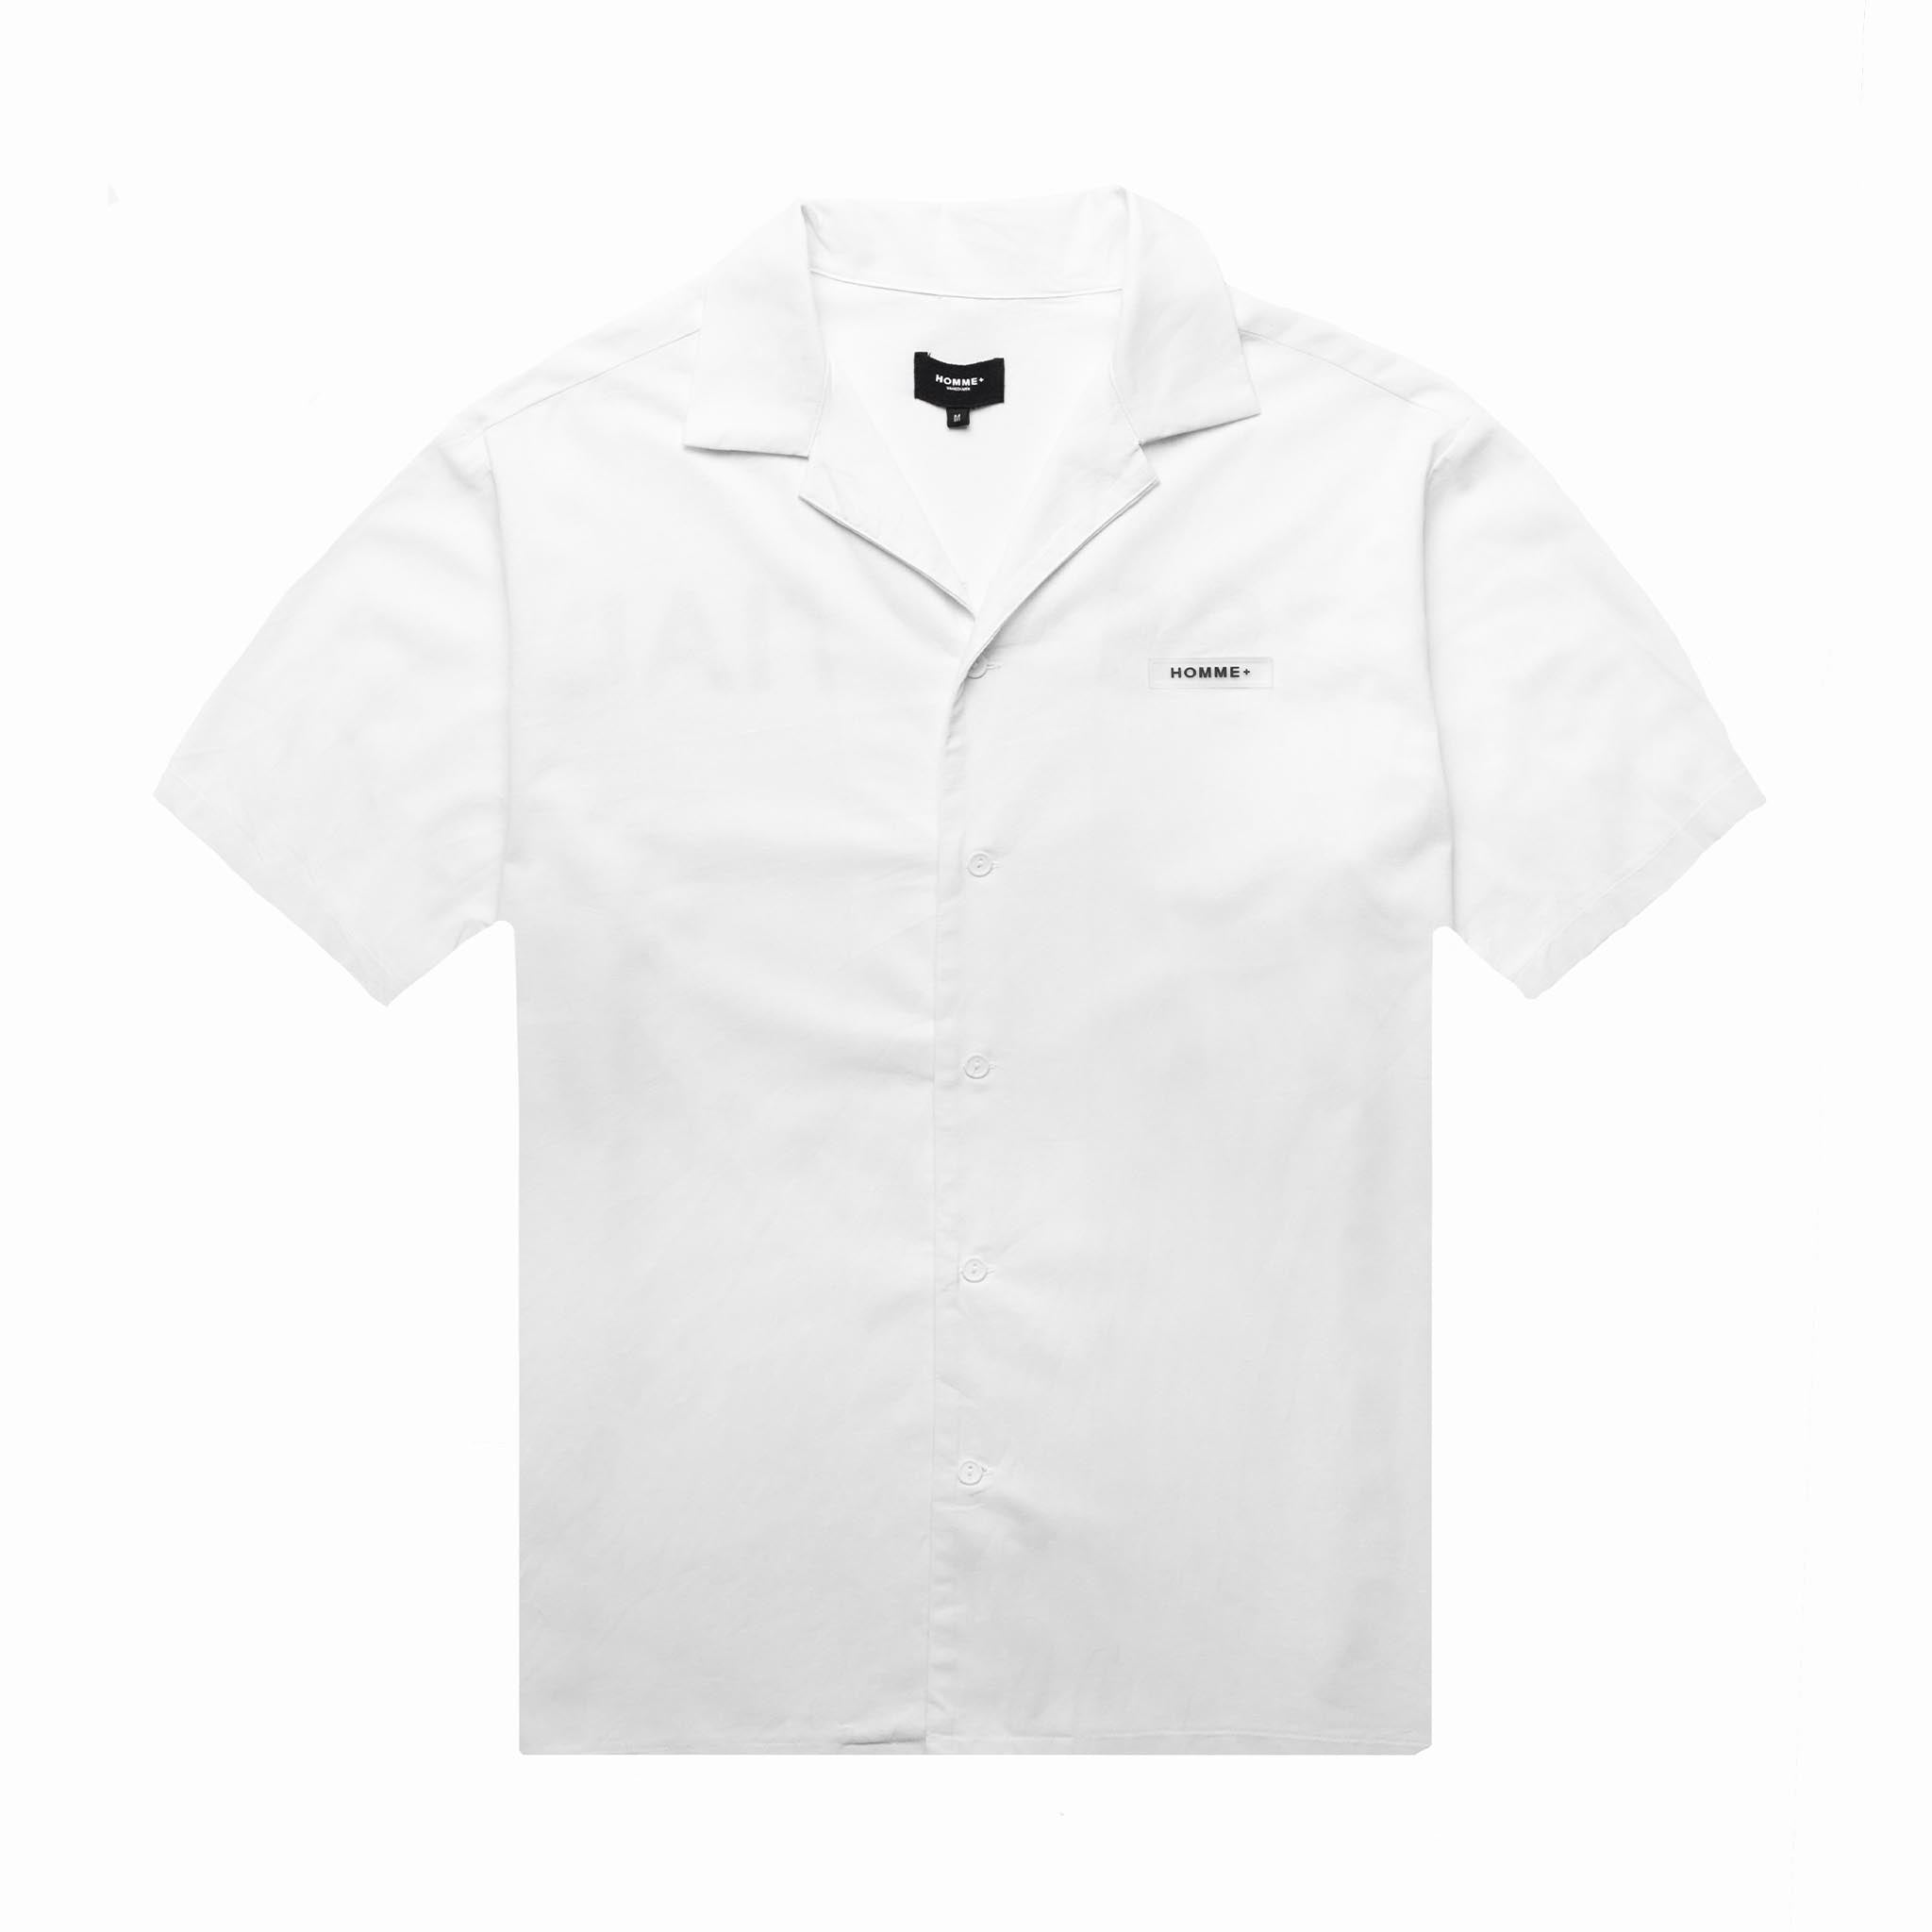 HOMME+ 'ESSENTIAL' Camp Shirt White